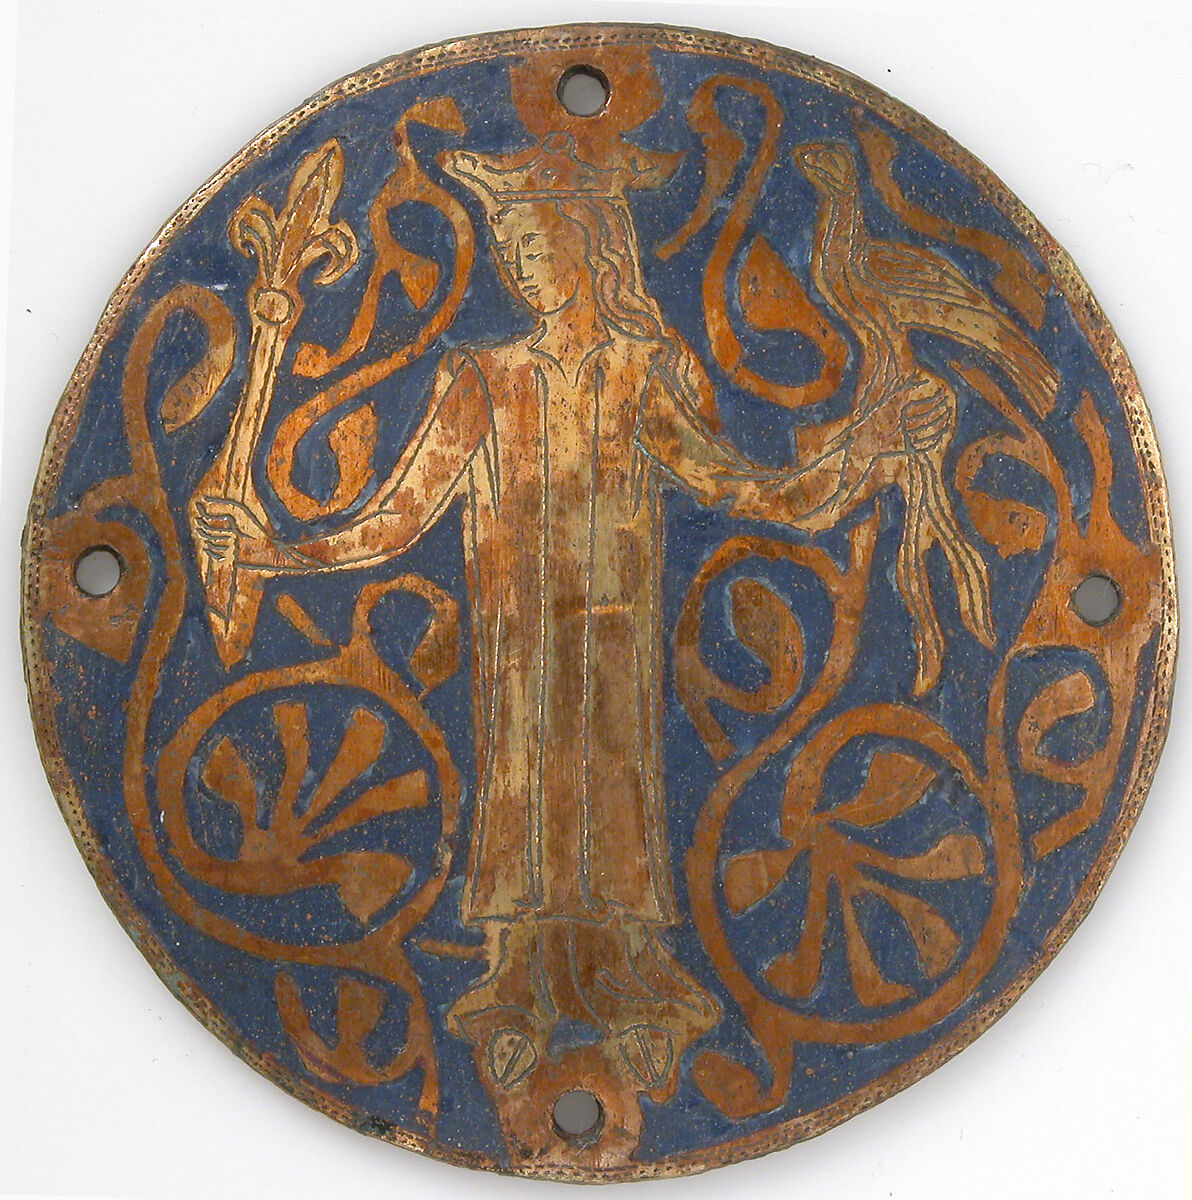 Medallion with a Queen Holding a Scepter and Falcon, Copper: engraved and gilt; champlevé enamel: medium and light blue and white, French 